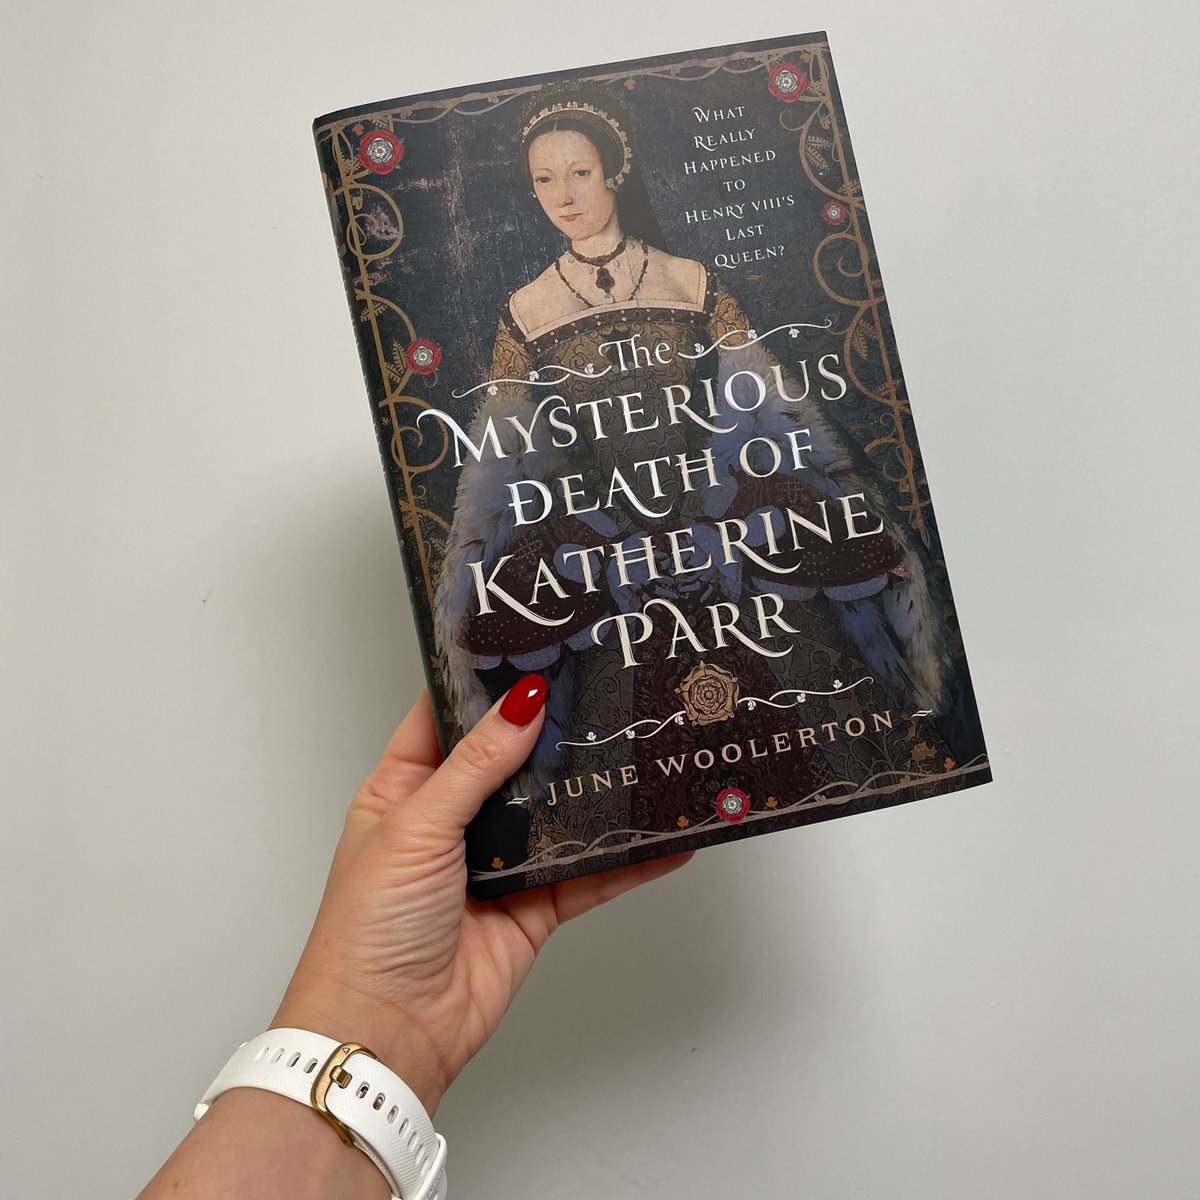 #NewBook 📖 - The Mysterious Death of Katherine Parr 👑 The Mysterious Death of Katherine Parr dives into the calamitous and tumultuous events leading up to the last hours of a once powerful queen and the bizarre happenings that followed her passing. 🛒 buff.ly/3vCTc4p